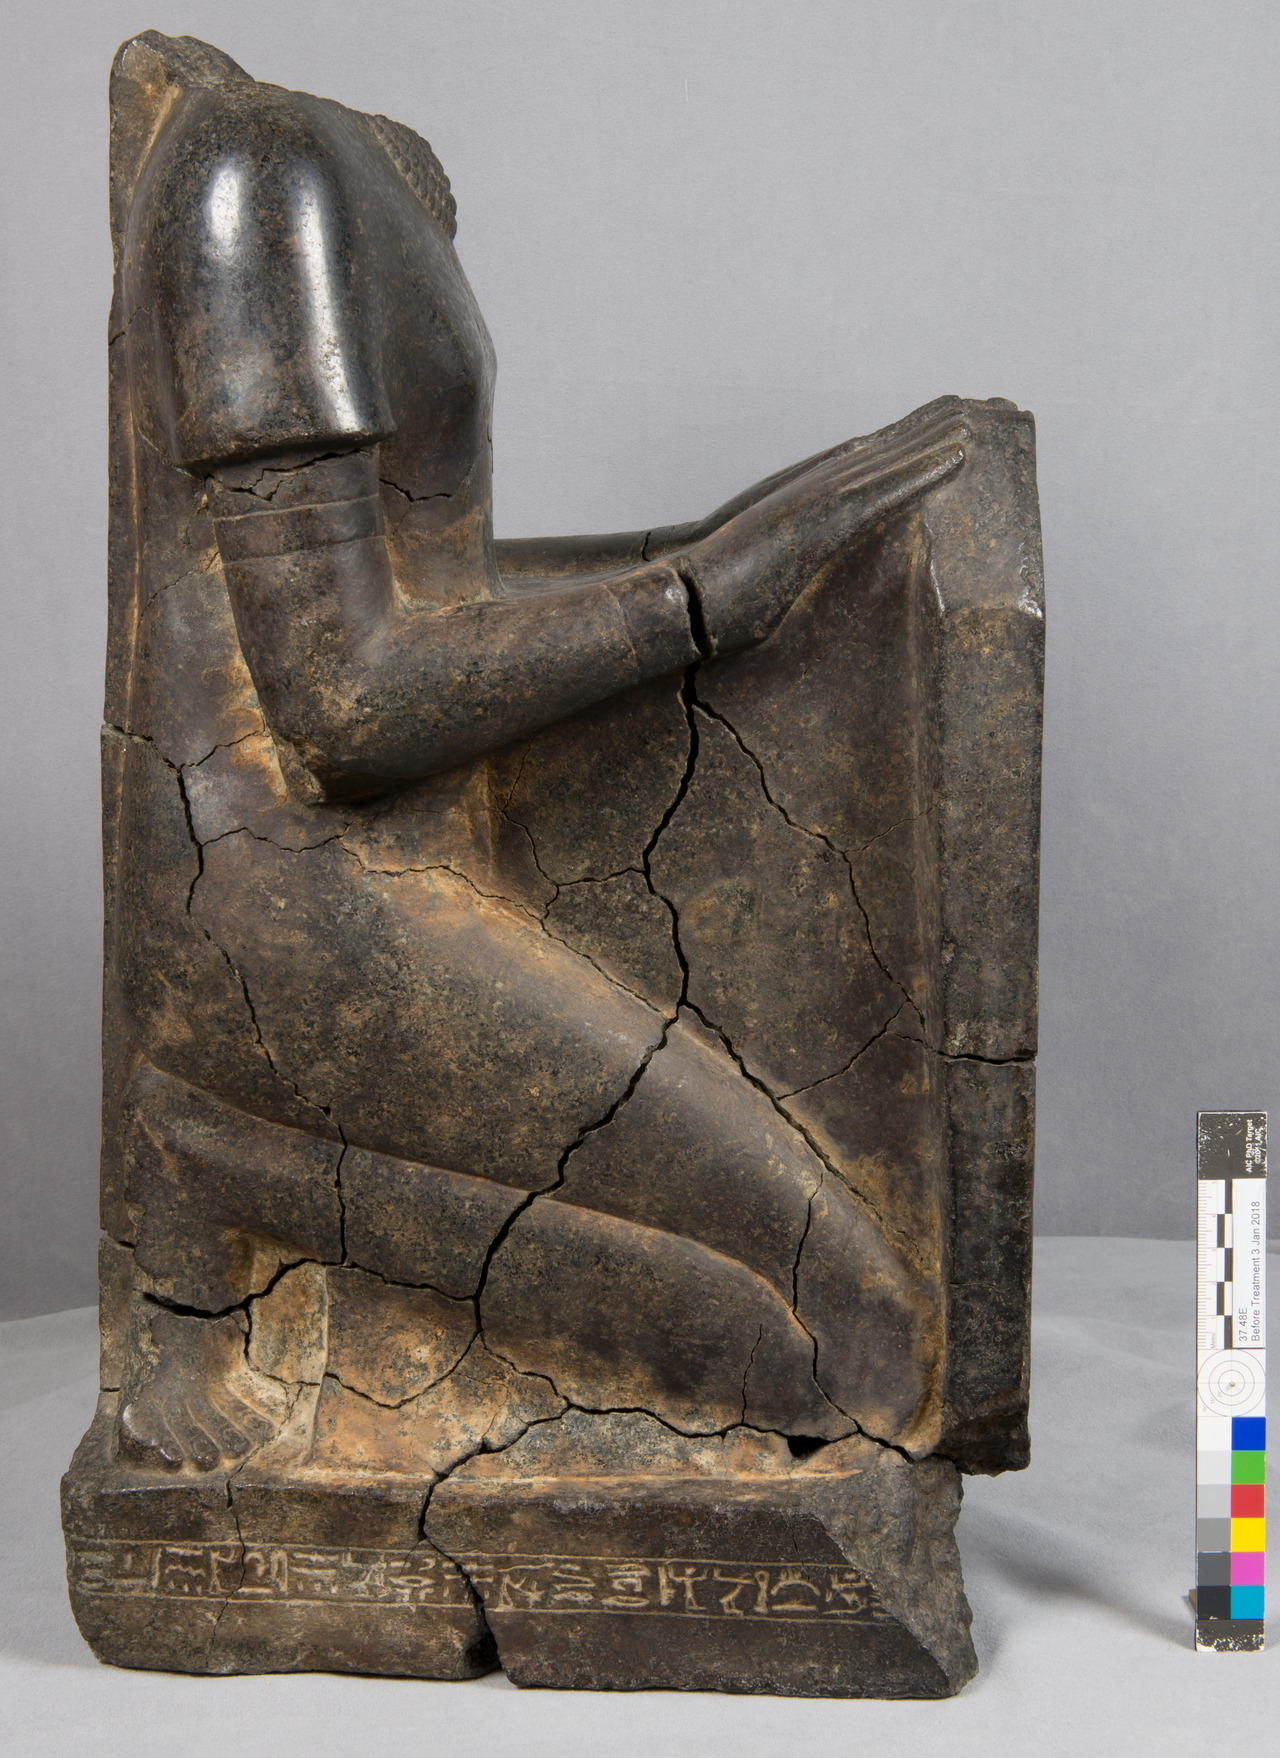 Why is this ancient Egyptian sculpture cracked? In        preparation for the        upcoming touring exhibition Striking Power: Iconoclasm in Ancient        Egypt, the curator wondered what caused the cracking of the stone?        Ancient Egyptians sometimes deliberately...